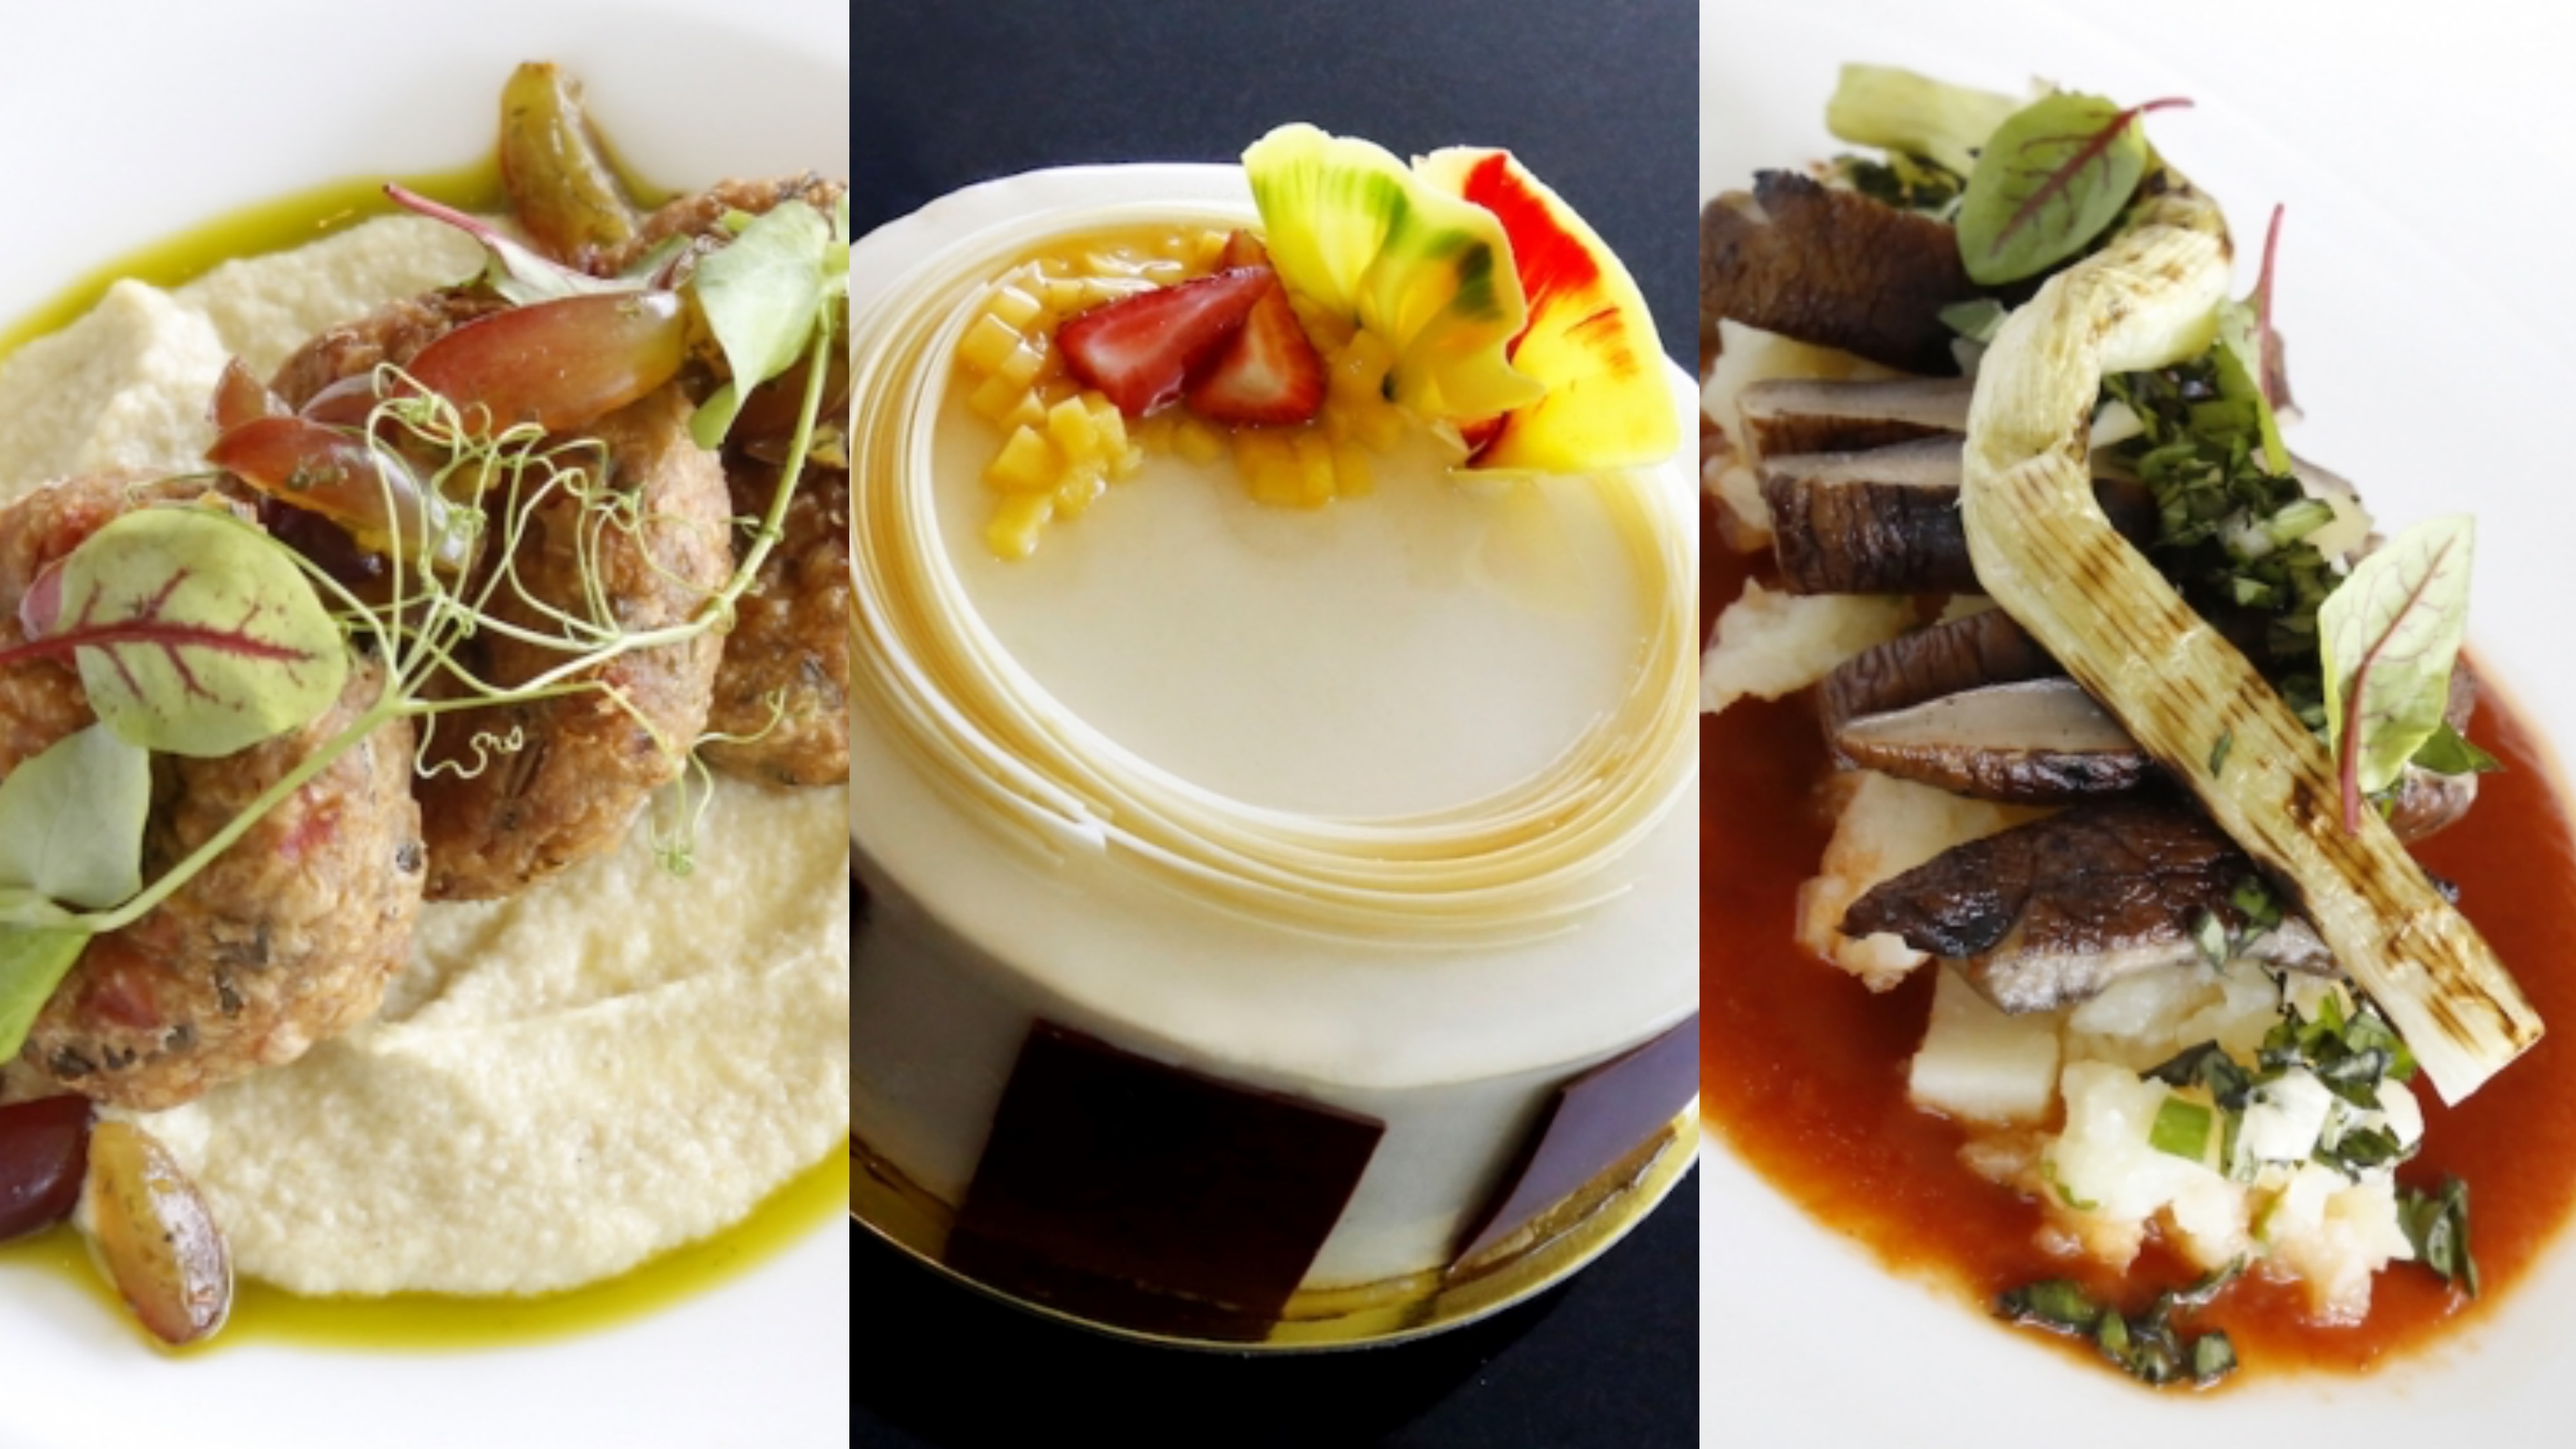 You won’t believe these dishes are actually good for you: (L-R) Chickpea Falafel, Mango Almond Cake, and Grilled Mushroom and Leeks. PHOTOS: Marriott Manila